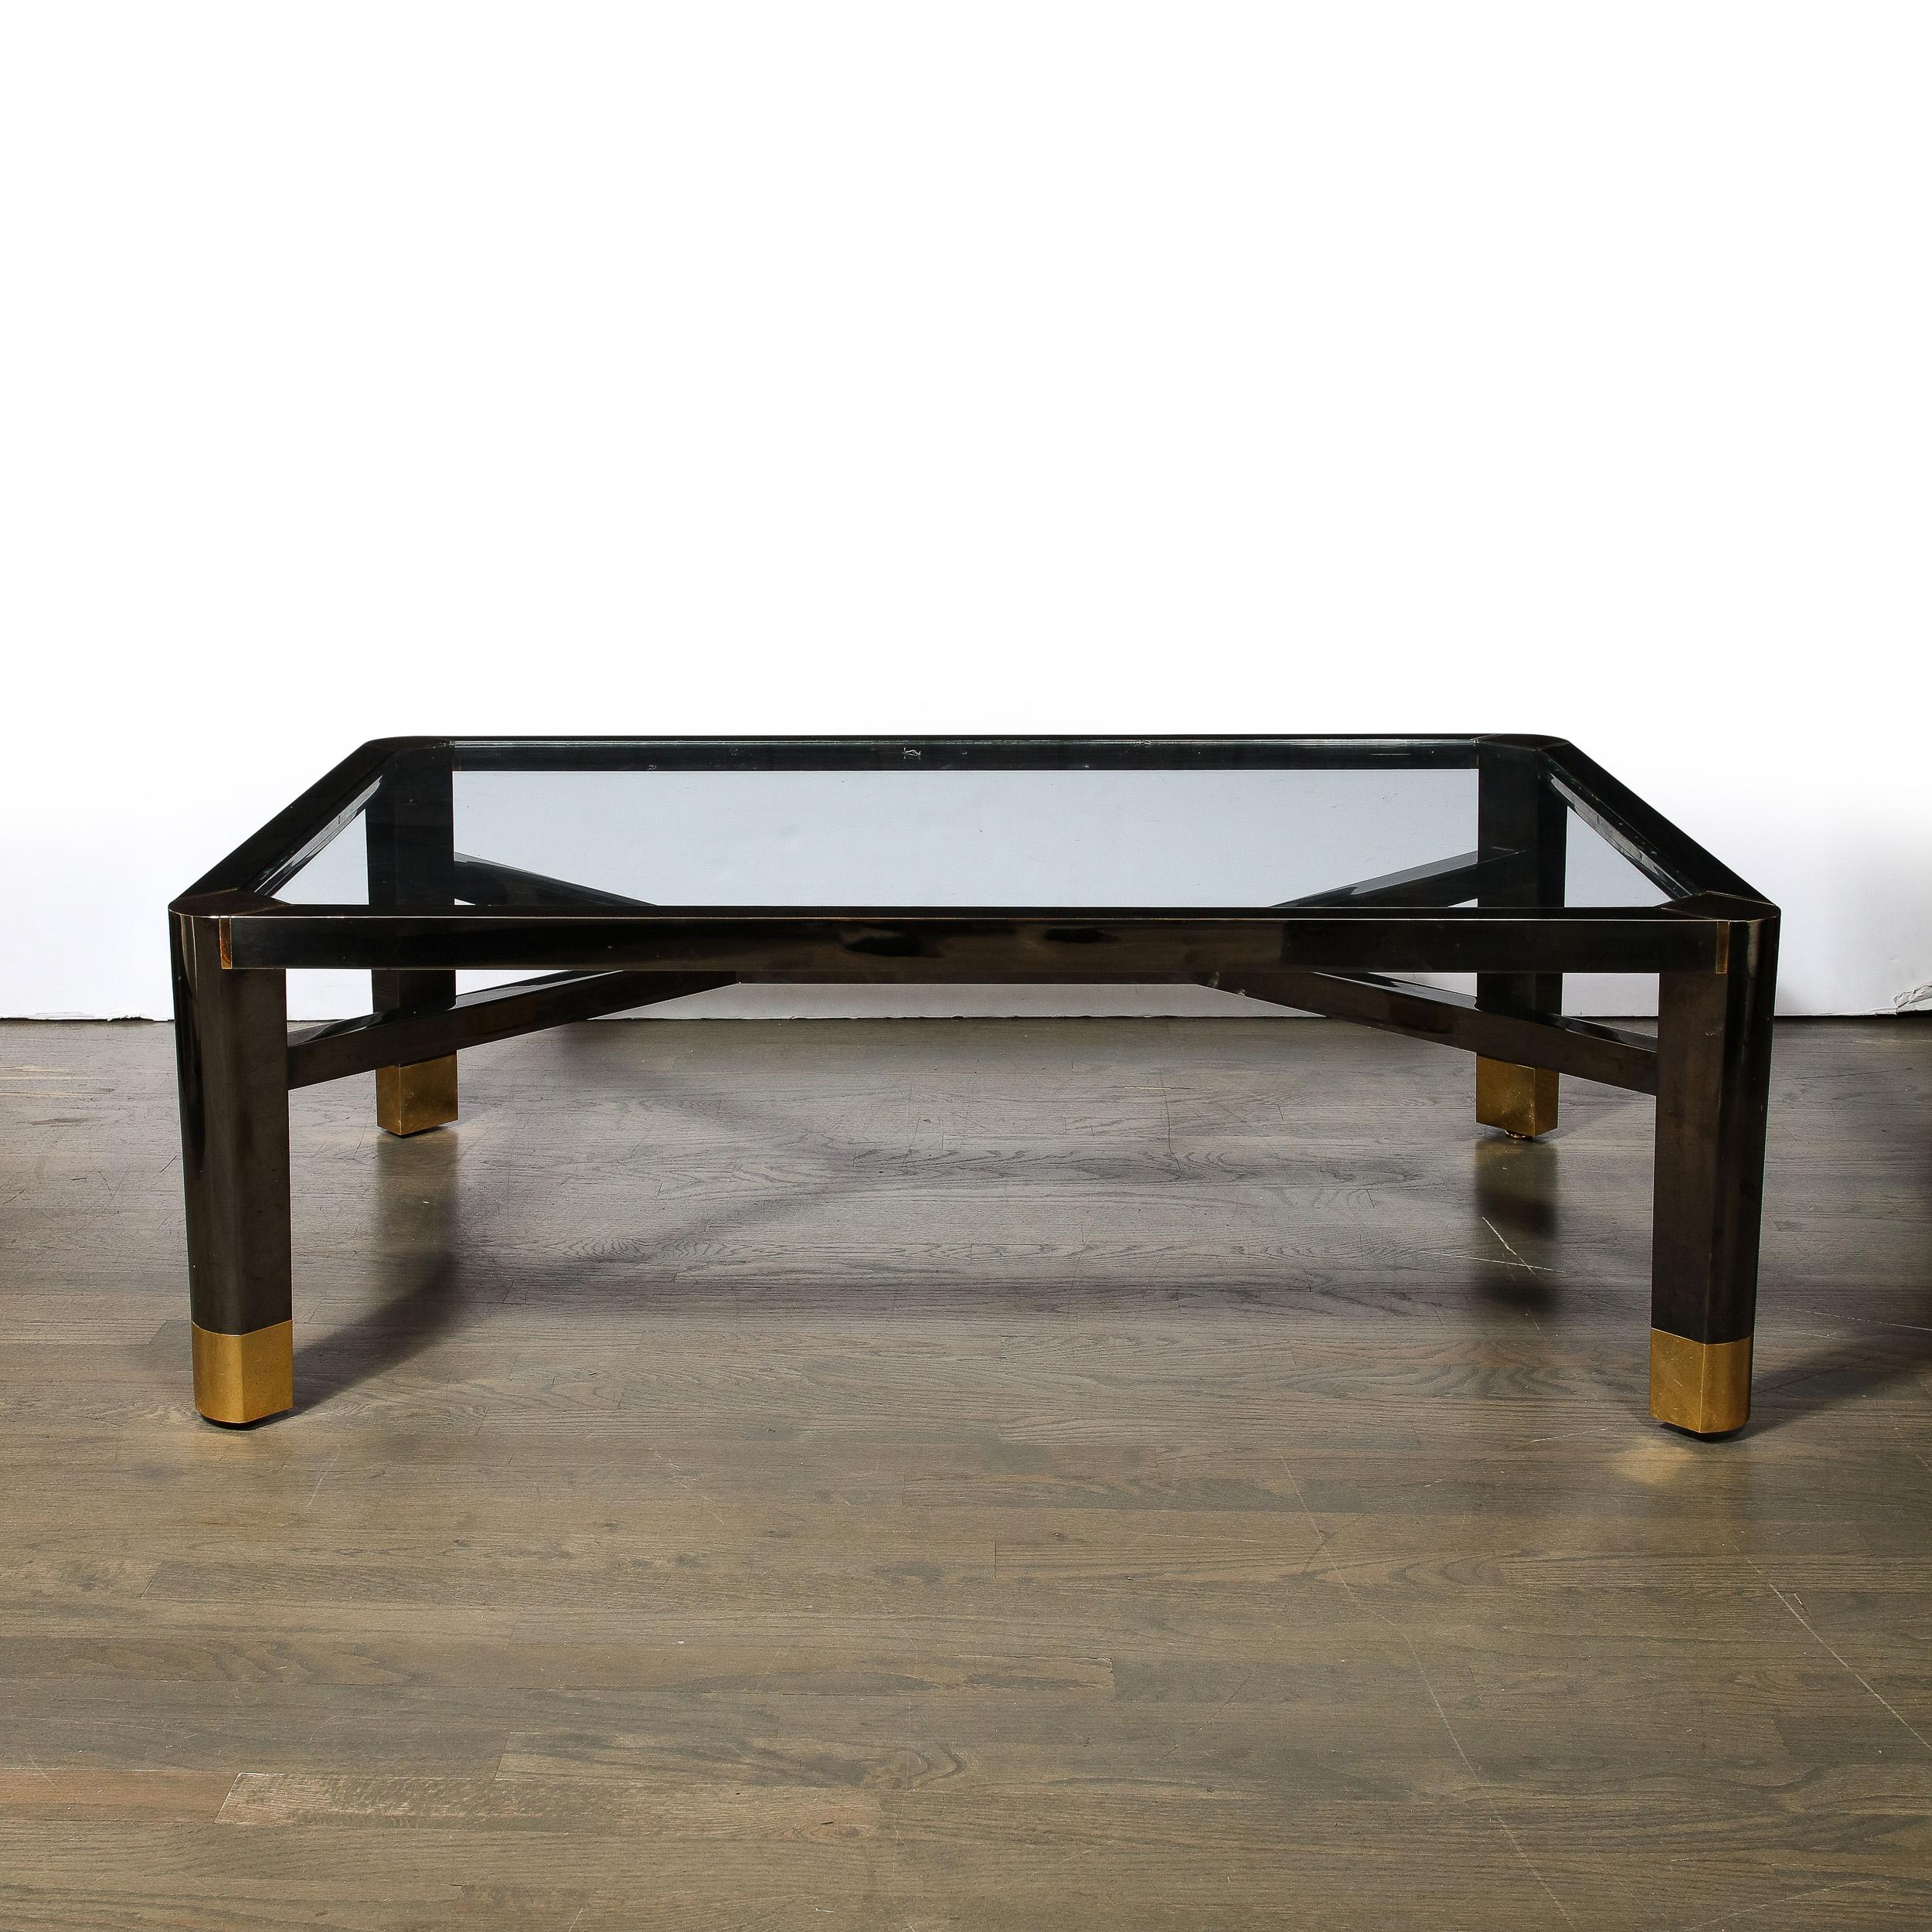 This bold and elegant Mid-Century Modernist Cocktail Table by Lorin Marsh originates from the United States, Circa 1980. Featuring a simplified geometric profile with precise material execution and detailing in Gunmetal and Polished Brass, the piece